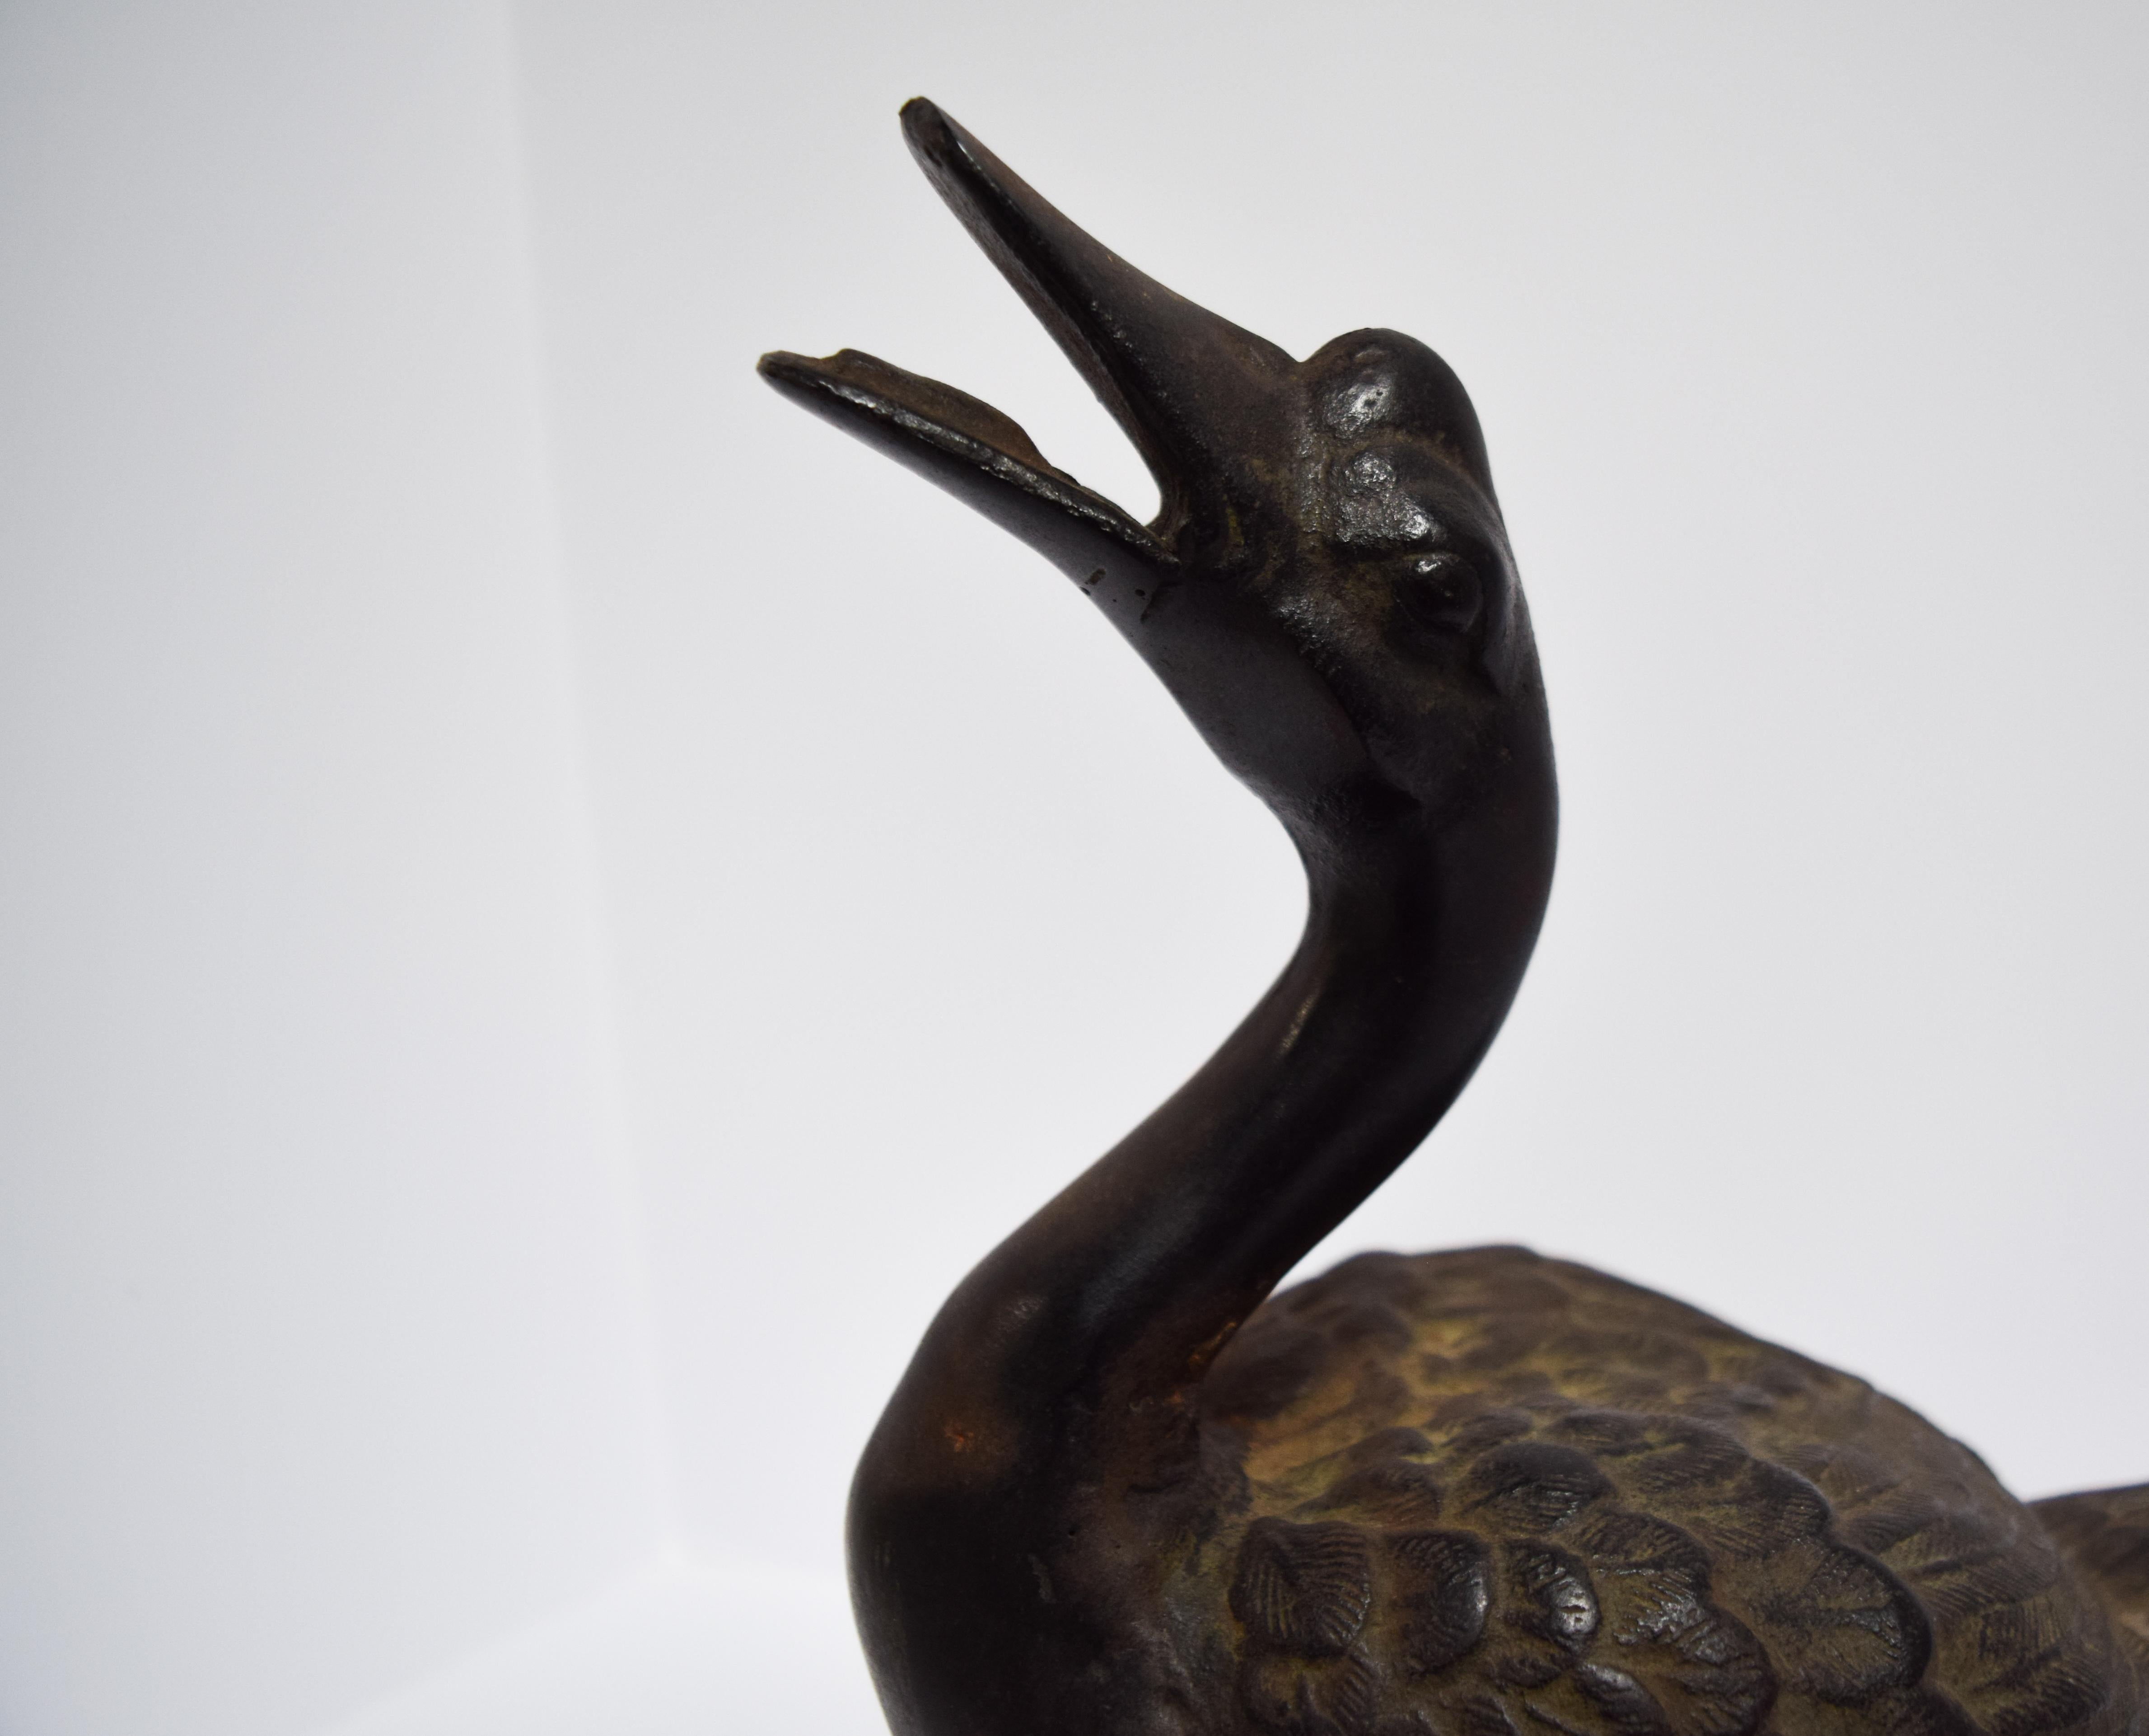 Edo period, mid-19th century. This highly detailed cast bronze Japanese goose is a symbol of longevity and luck. The webbing on the feet and feathers are meticulously sculpted and balanced beautifully with a naturally occurring patina.
From the